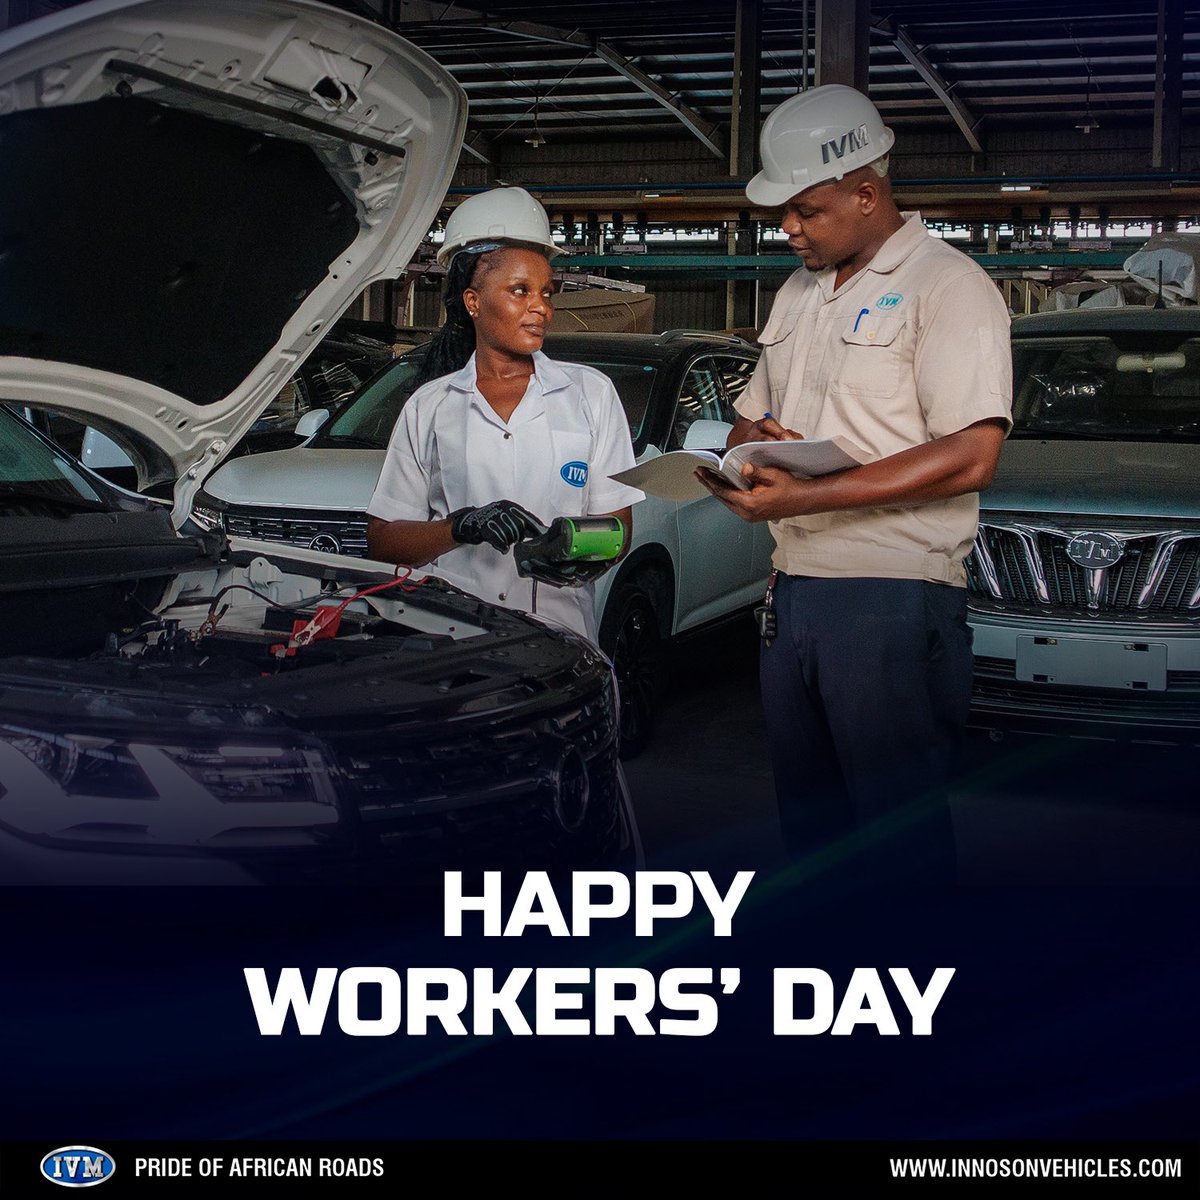 From the factory floor to the road of success, our team’s dedication fuels every journey. Happy Workers’ Day from Innoson Vehicles #Workers